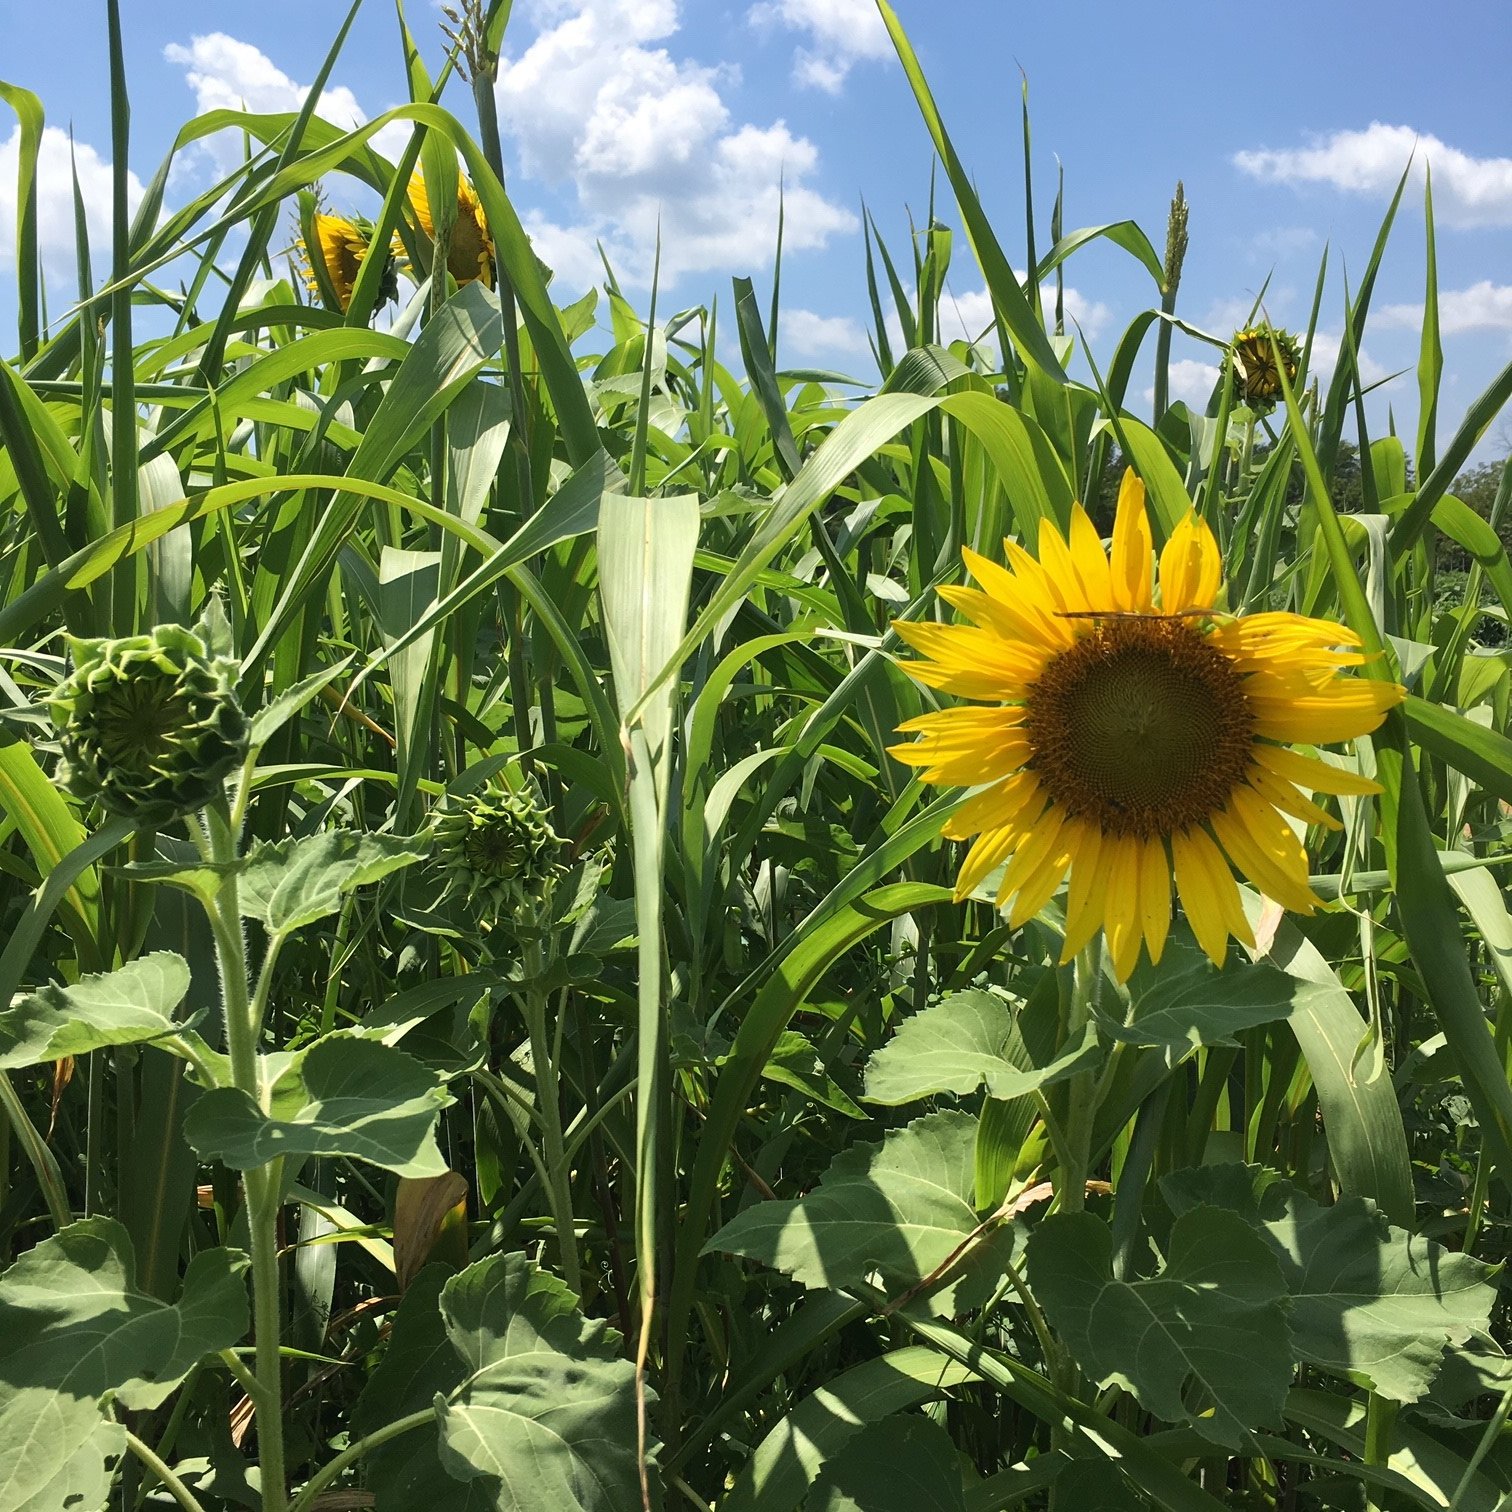 Next Happening: Uncovering Cover Crops